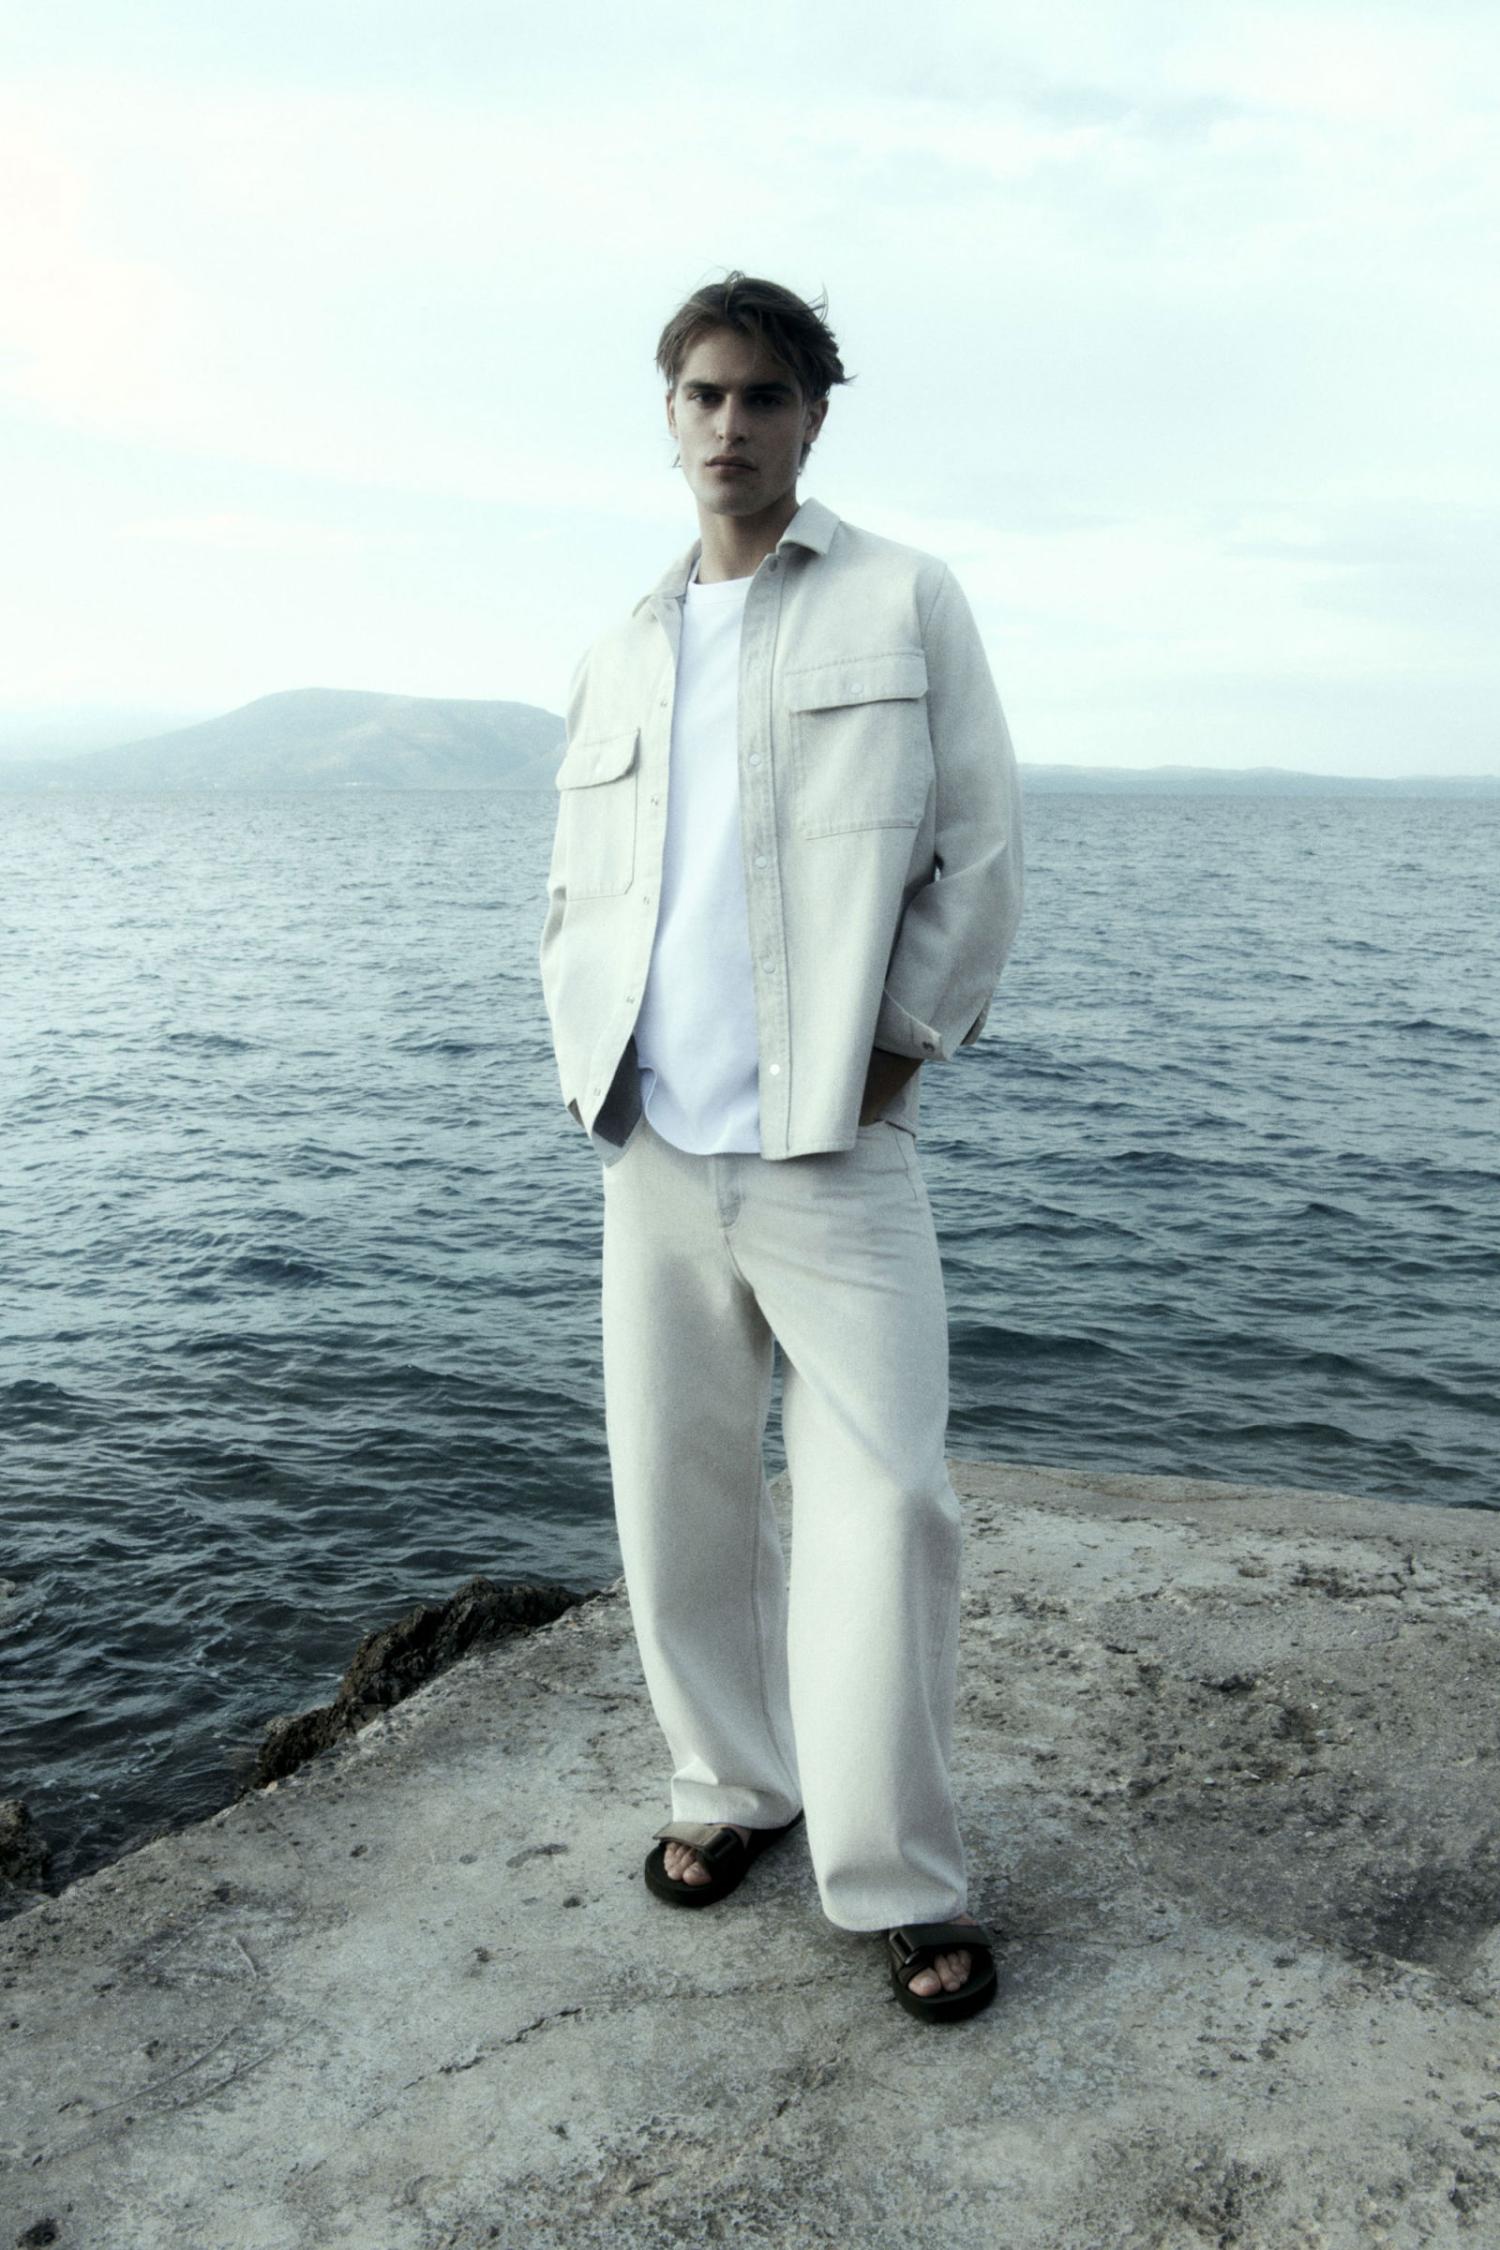 Parker Van Noord by Robin Galiegue for COS Summer 2021 Ad Campaign  Clothing & Accessories: COS OFF-WHITE RELAXED WIDE-LEG JEANS / COS WHITE REGULAR-FIT LONG-SLEEVE T-SHIRT / COS BLACK STRAP SANDALS / Photographer: Robin Galiegue. Stylist: Virginie Benarroch. Hair Stylist: Michal Bielecki. Makeup Artist: Siddhartha Simone. Art Director: Andy Knappett